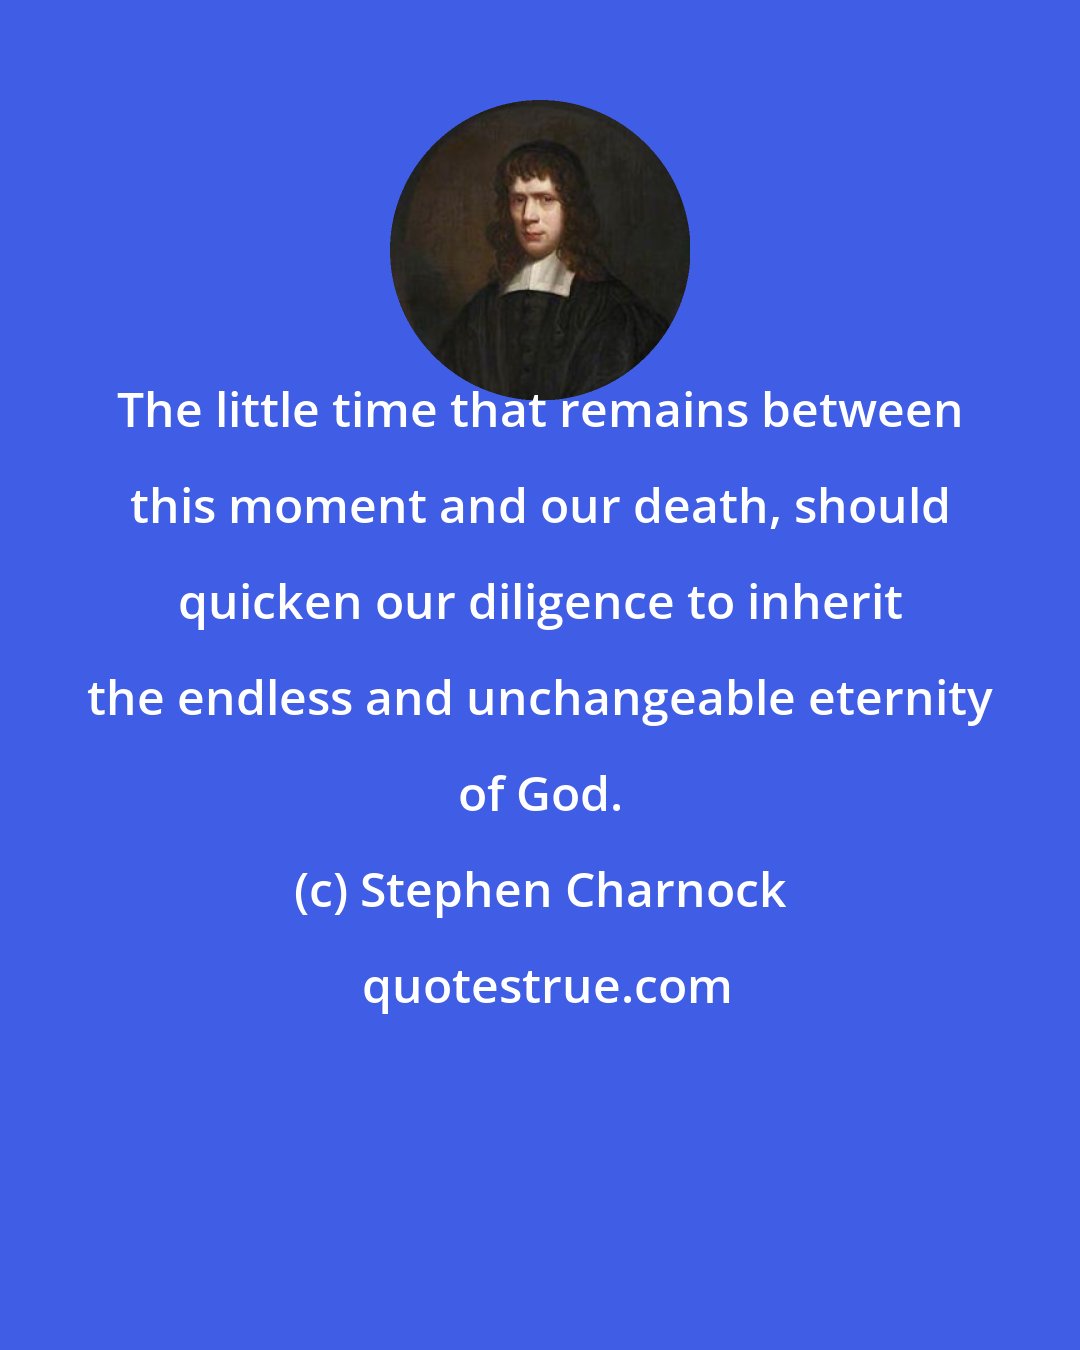 Stephen Charnock: The little time that remains between this moment and our death, should quicken our diligence to inherit the endless and unchangeable eternity of God.